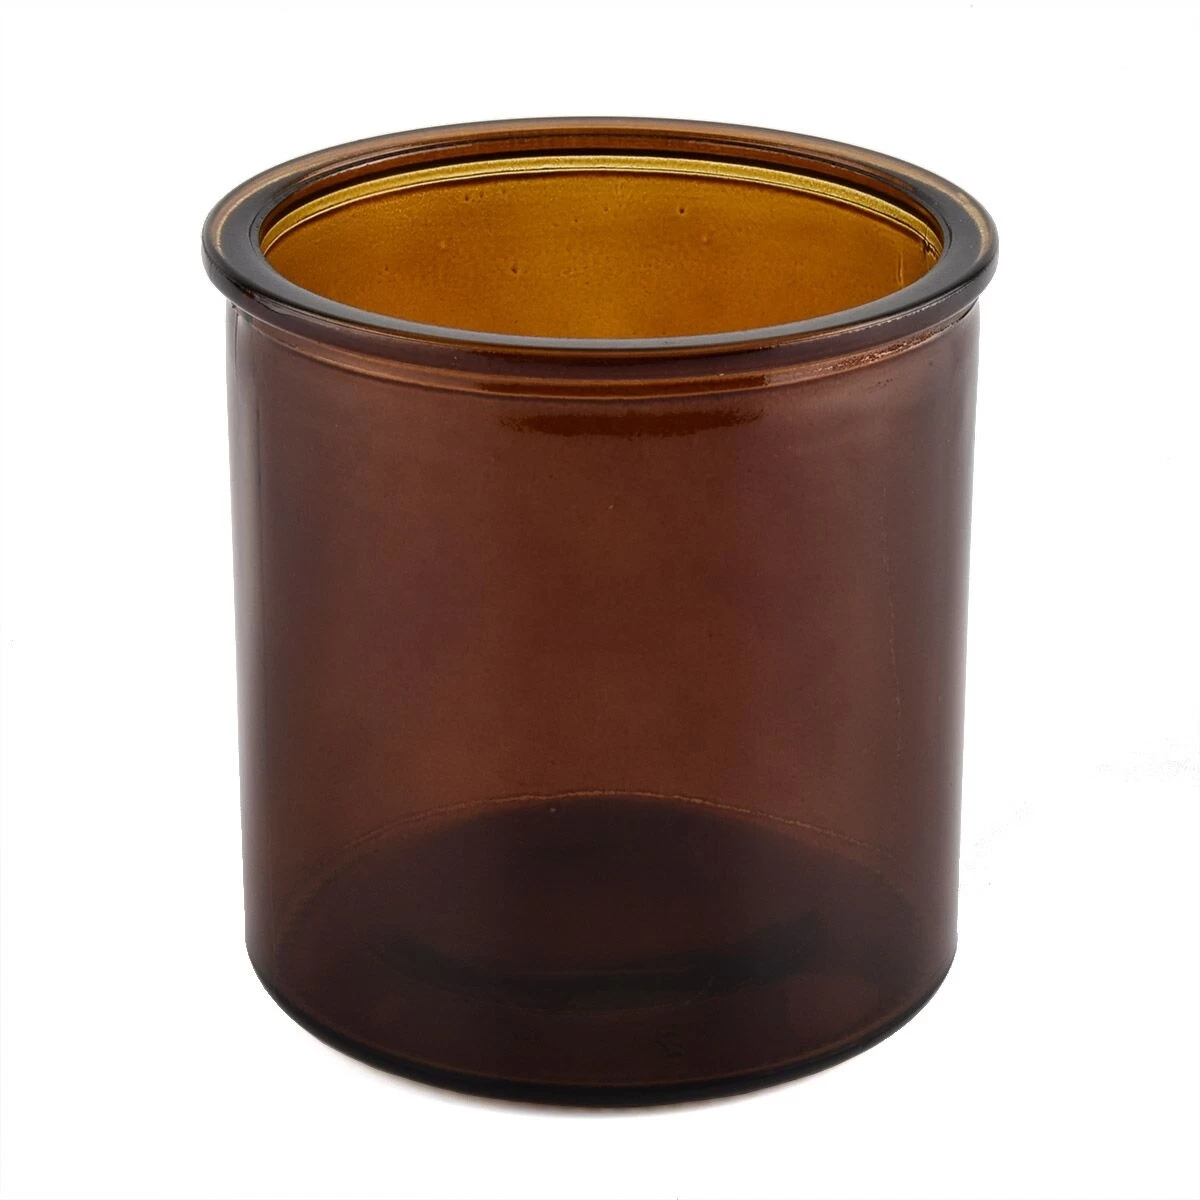 10oz glass candle jar with cork lid for USA market